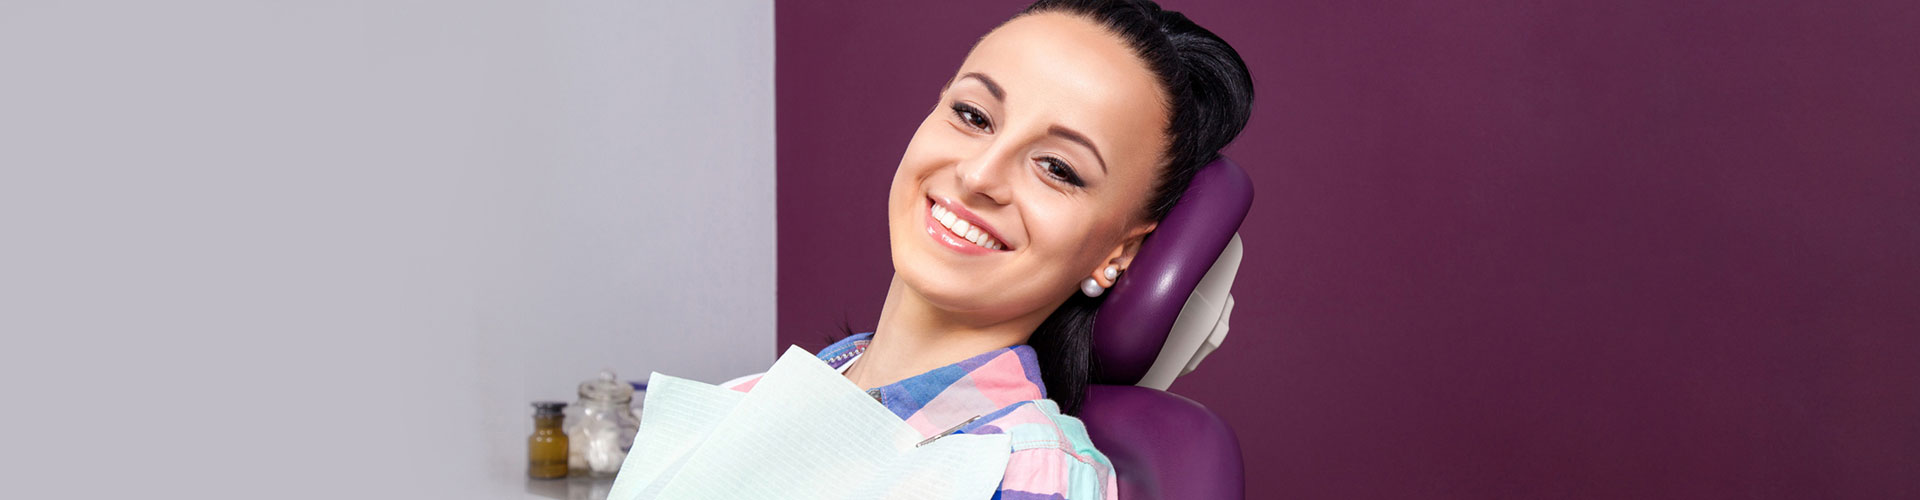 Root Canal Treatment in Vancouver, BC